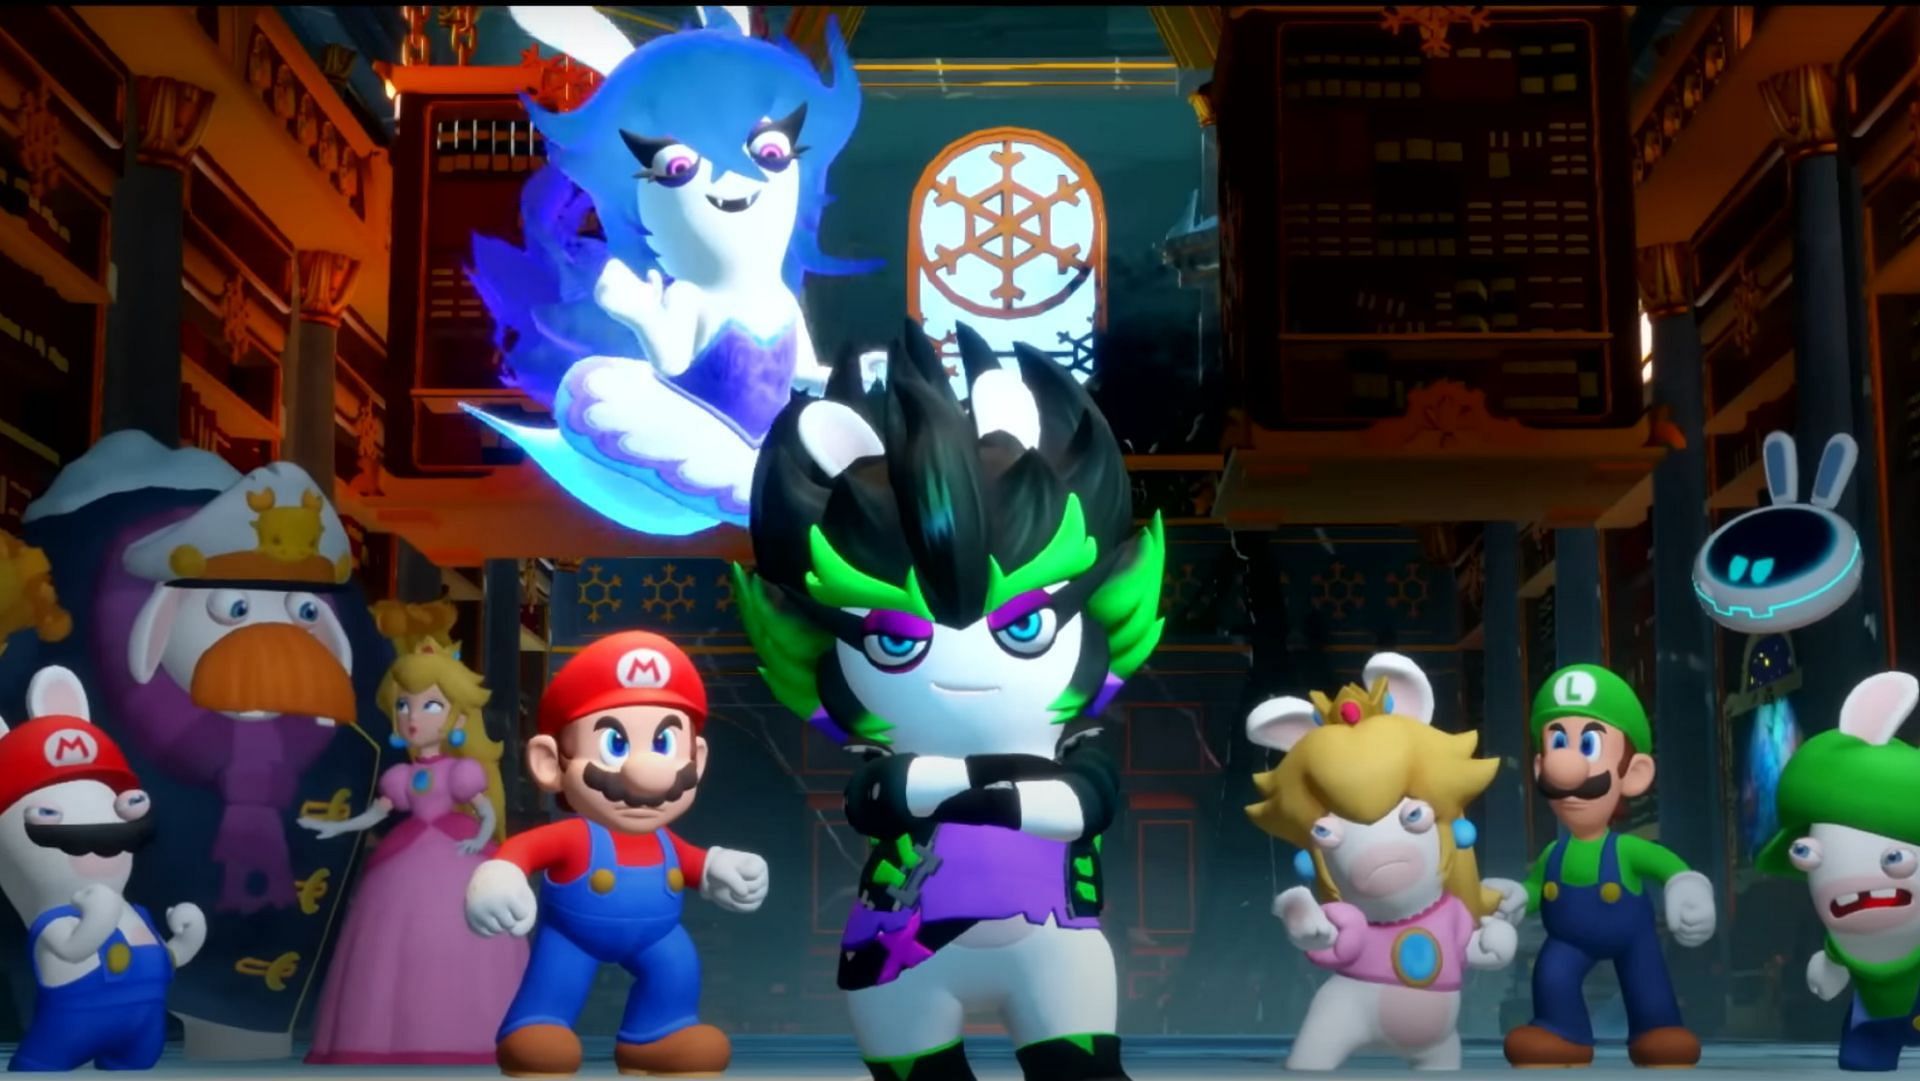 Midnite is one of the first major bosses in Mario + Rabbids: Sparks of Hope, but how do players overcome her? (Image via Ubisoft)